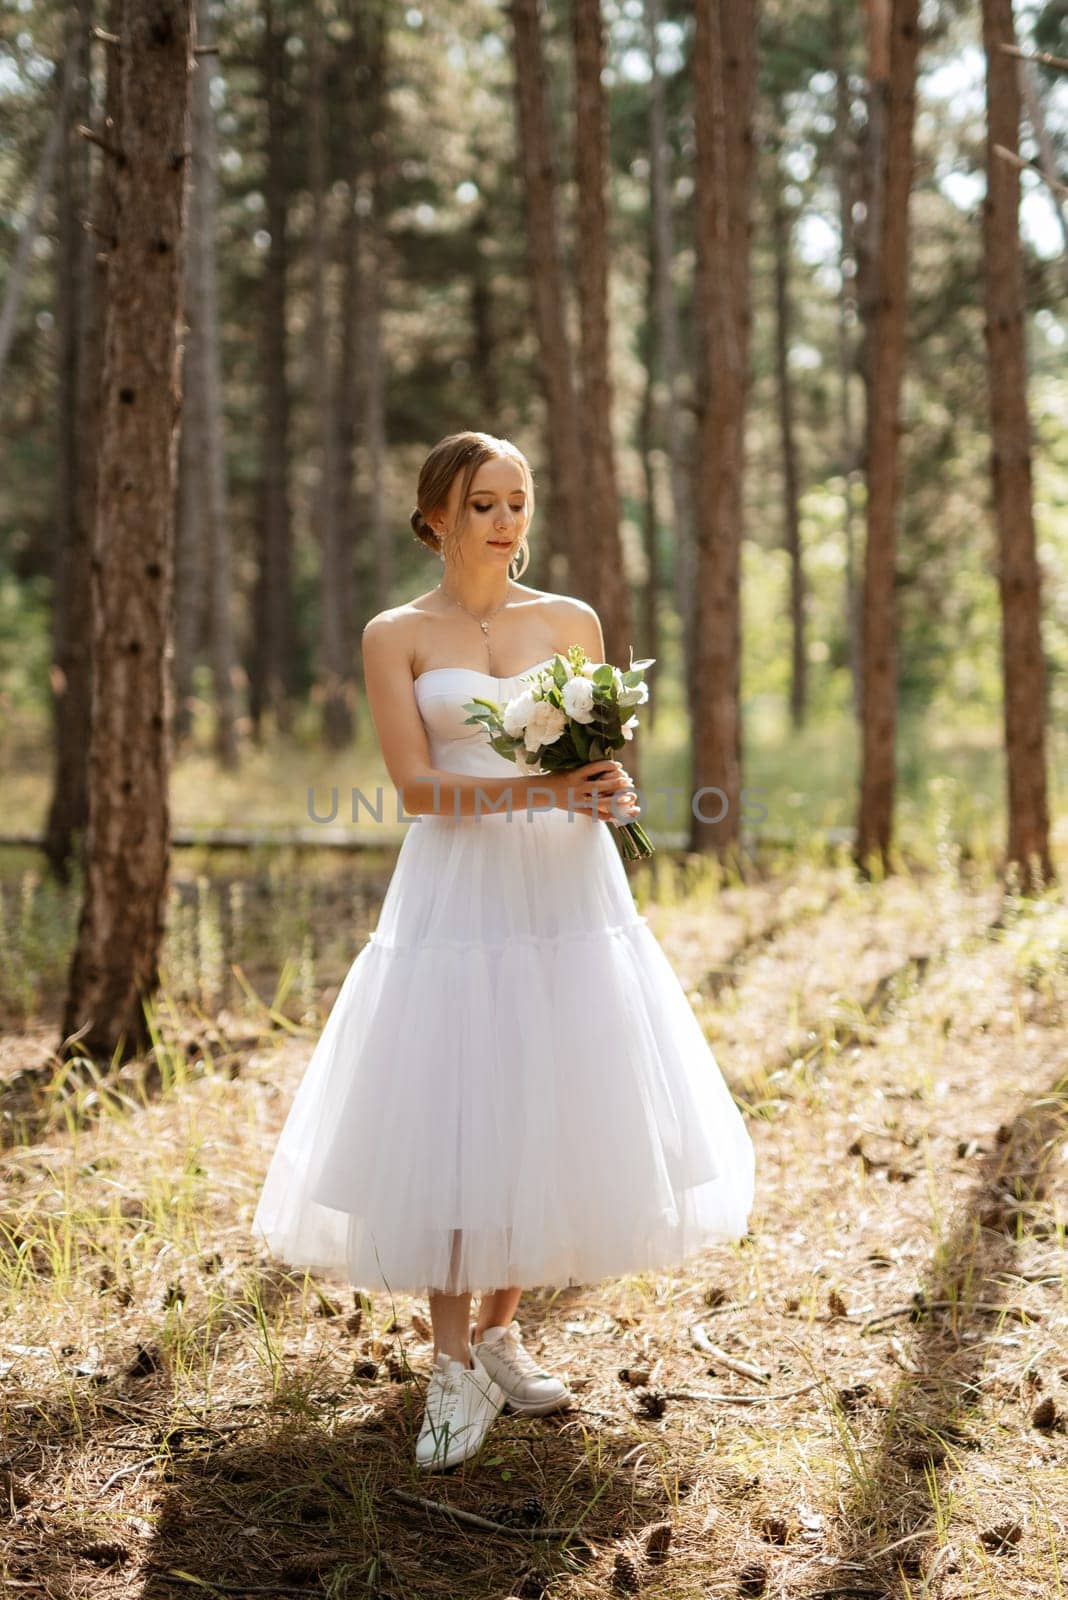 young bride in a white short dress in a spring pine forest among the trees